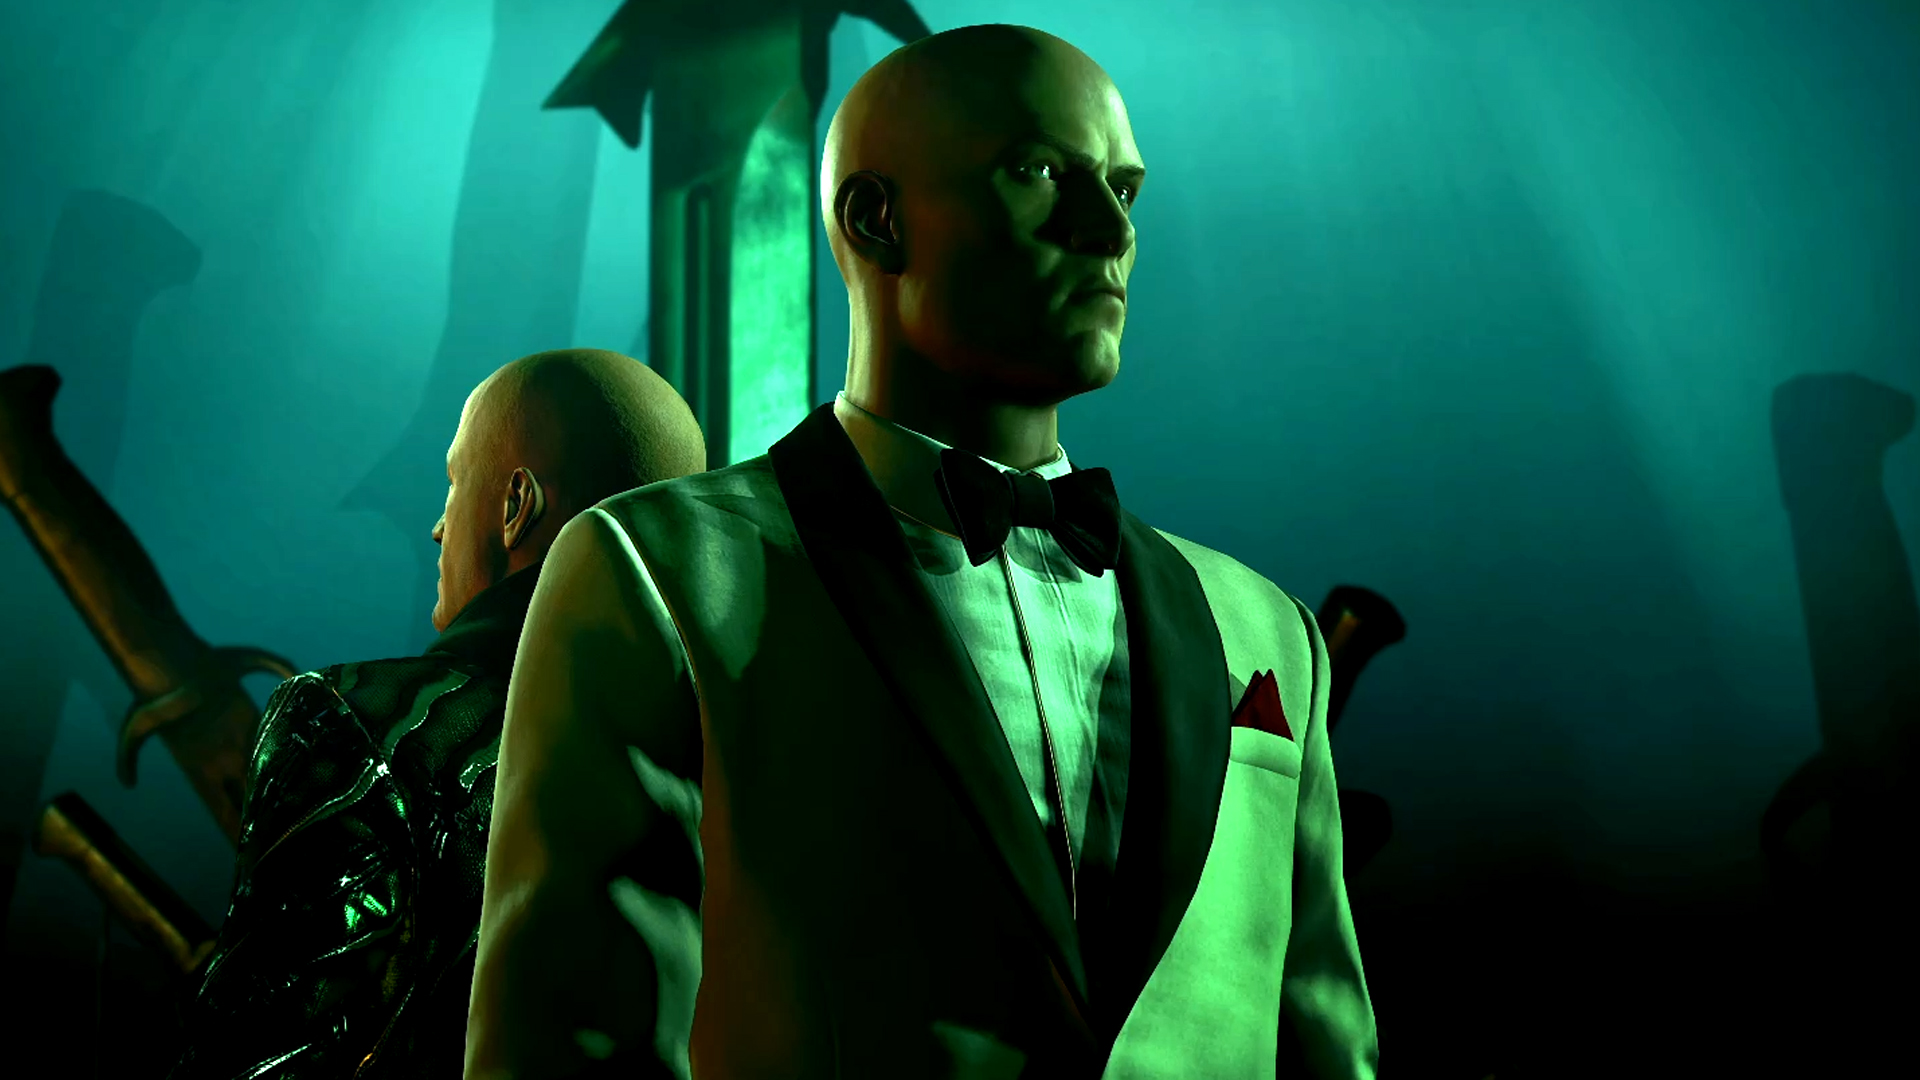 Hitman 3 roadmap introduces a new Elusive Target and free